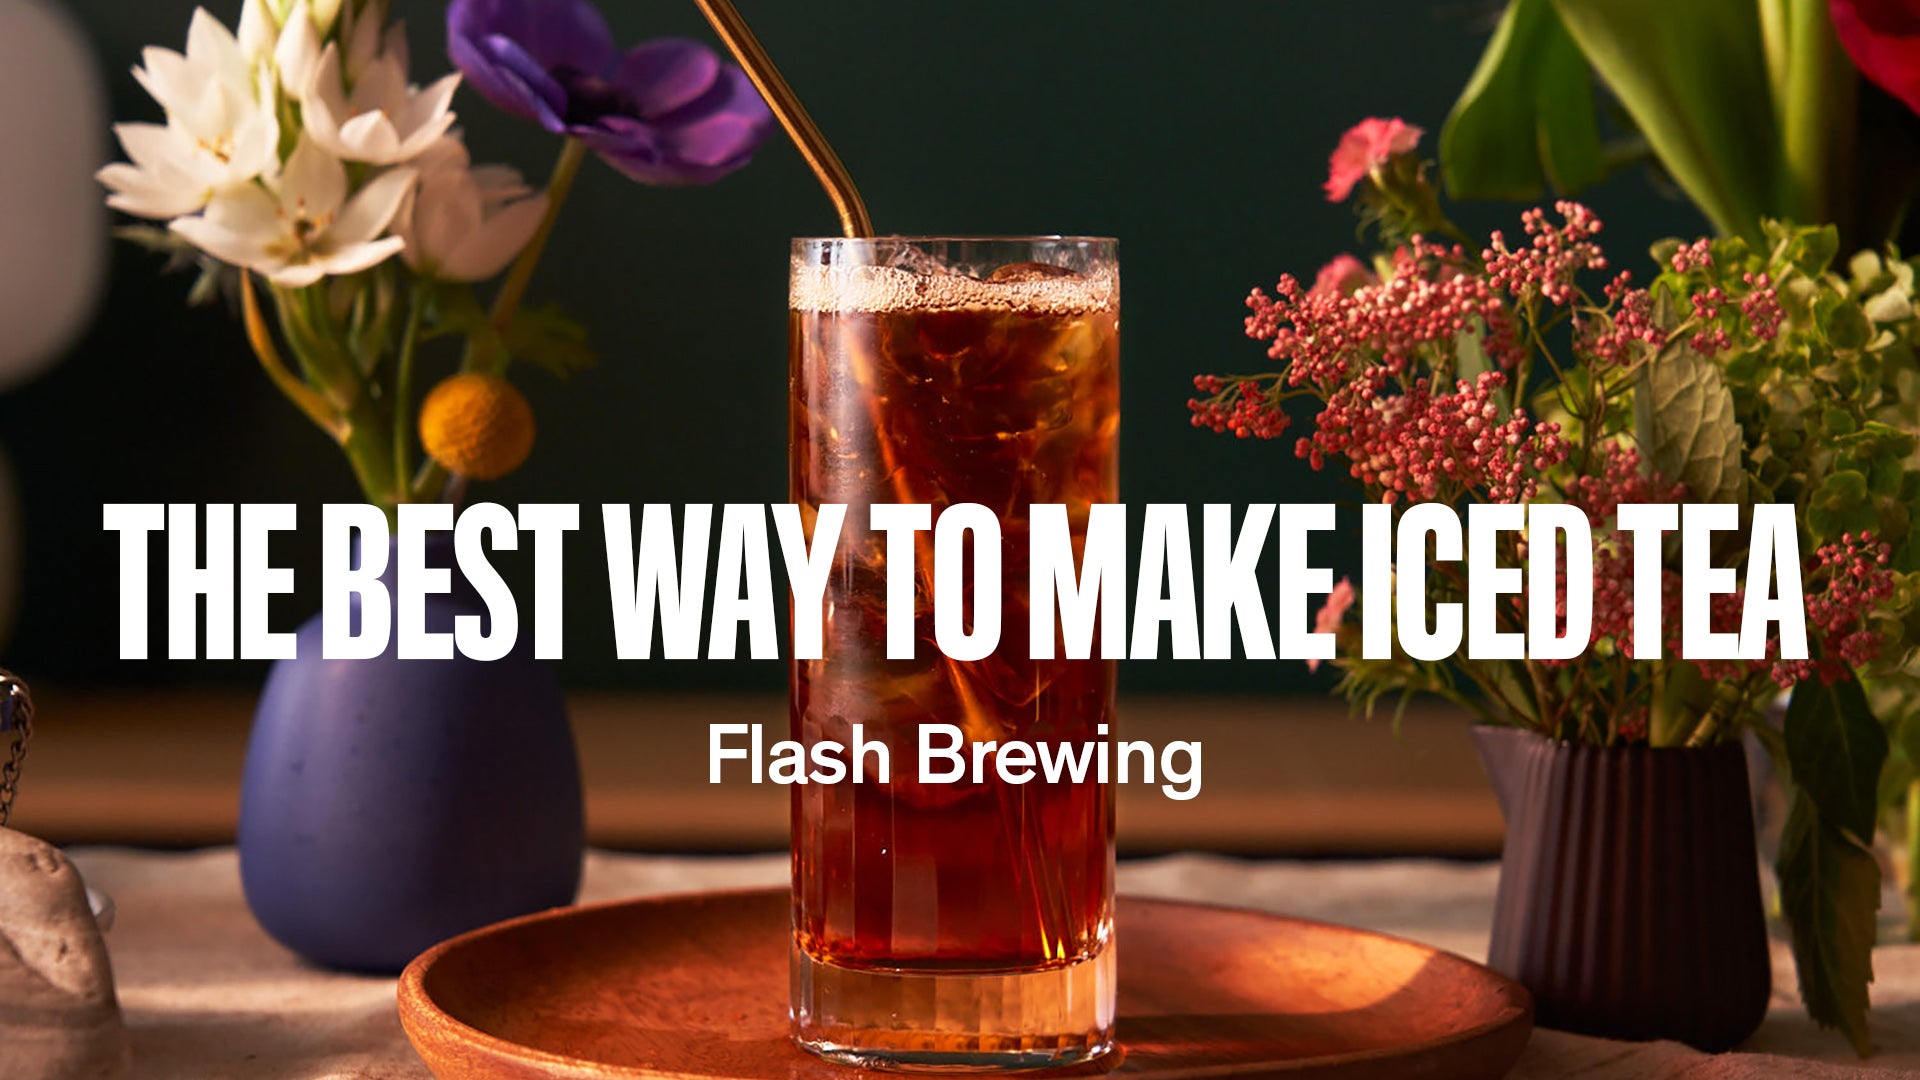 Flash Brewed Iced Tea: How To Make It